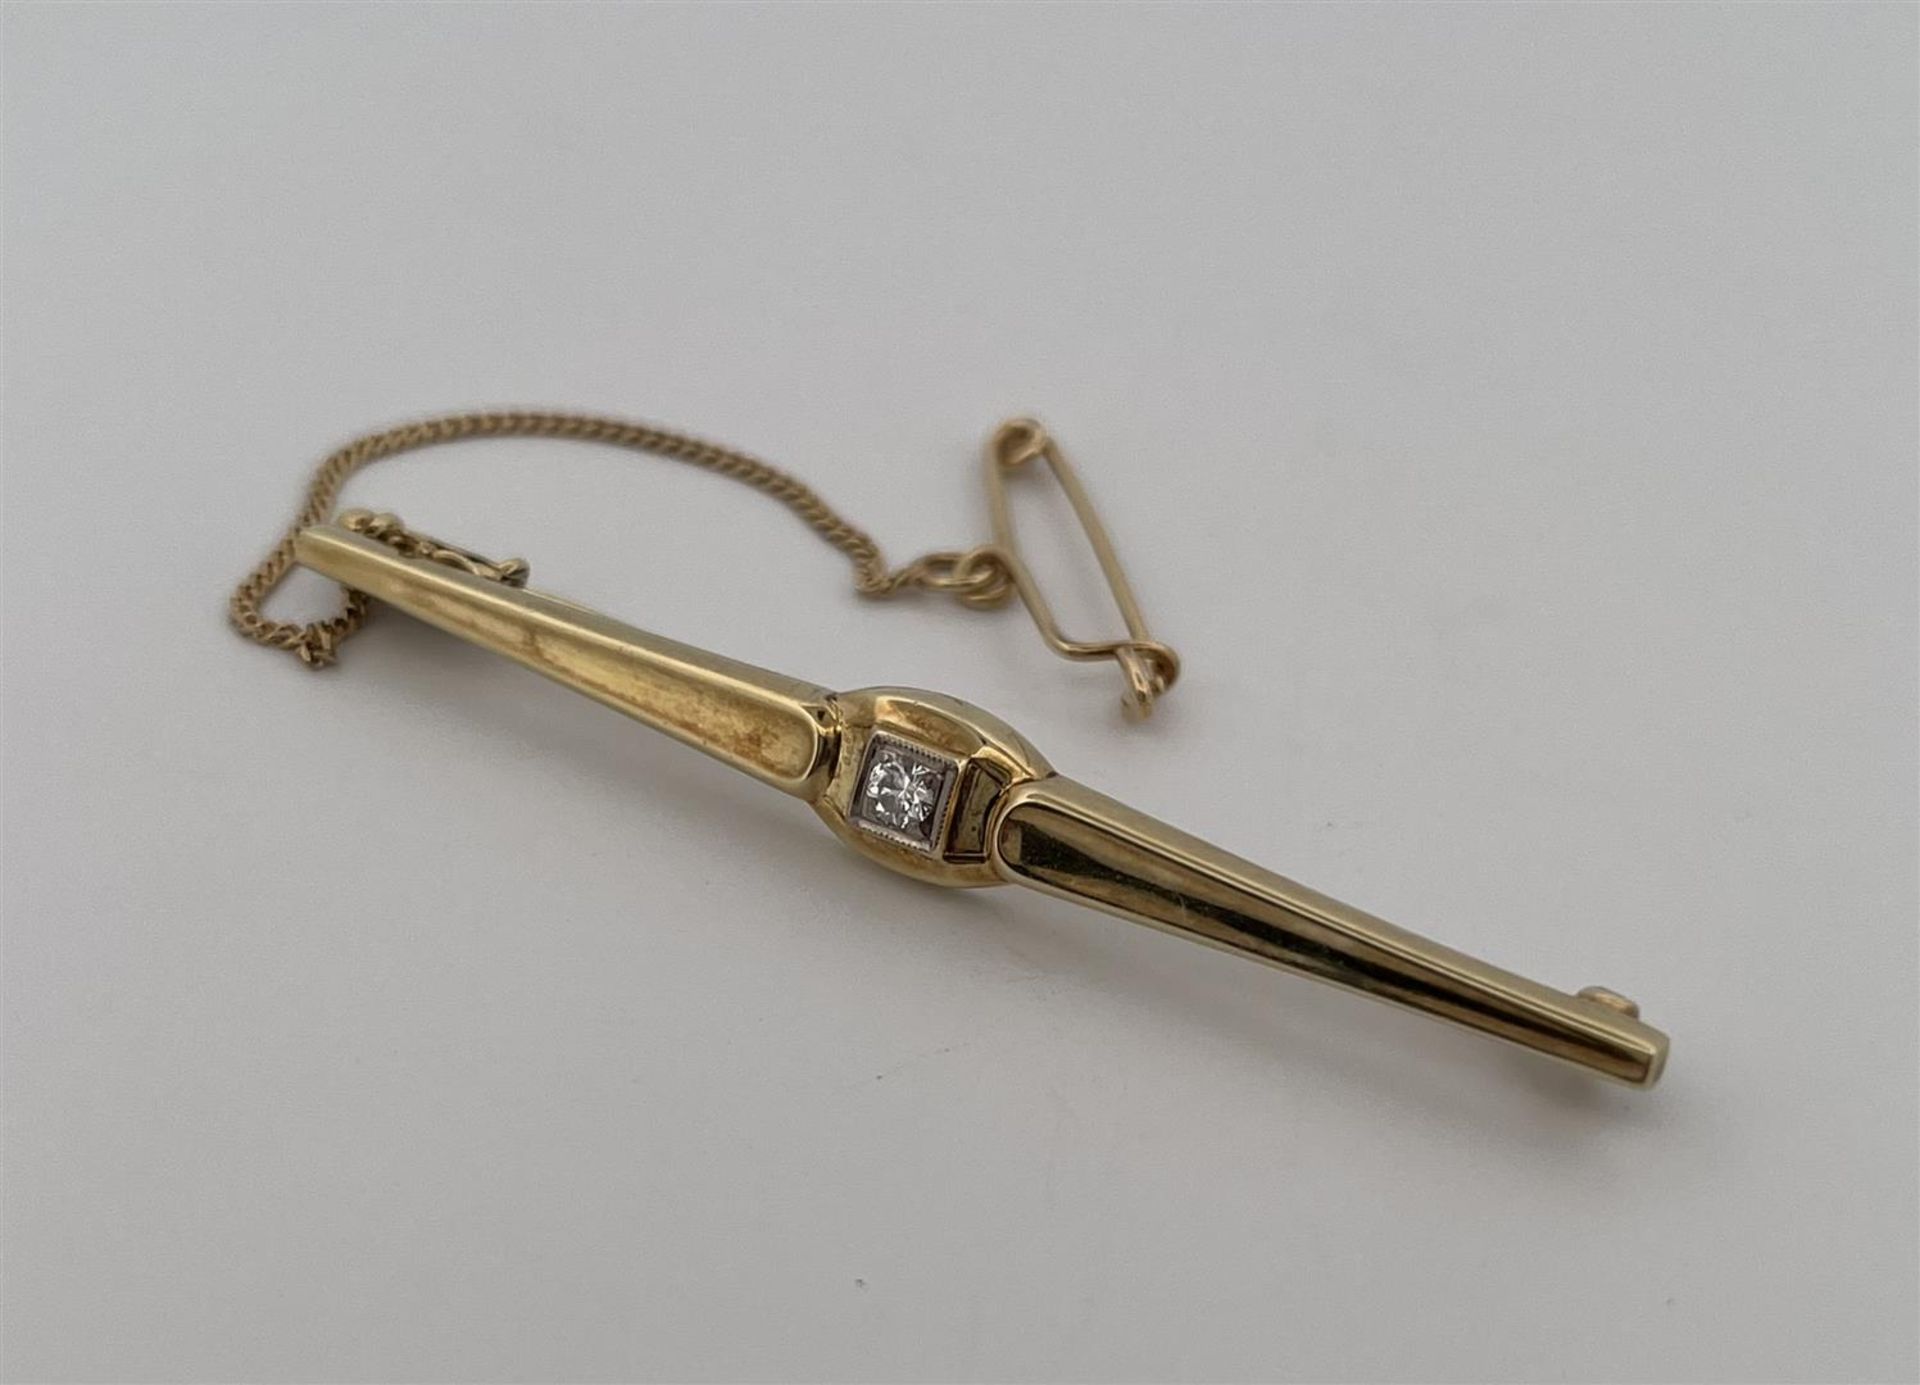 14kt yellow gold tie pin set with diamonds.
Beautiful tie pin with extra safety chain and pin, the t - Bild 2 aus 4